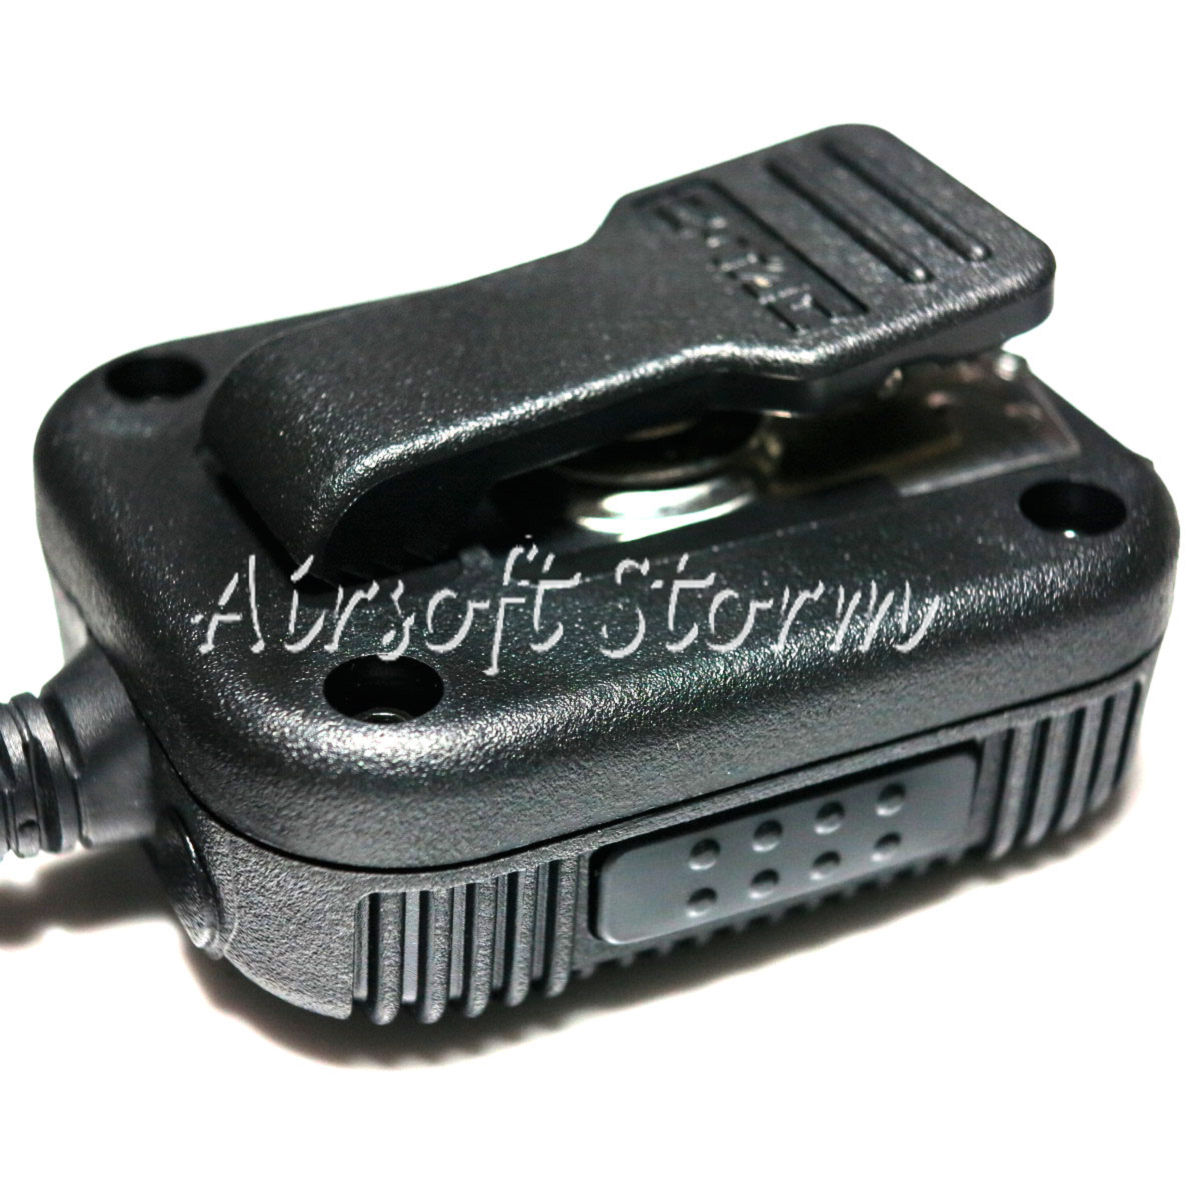 Airsoft Gear SWAT Z-Tactical USMC Intercom with mic for ICOM 2 Pin Radio